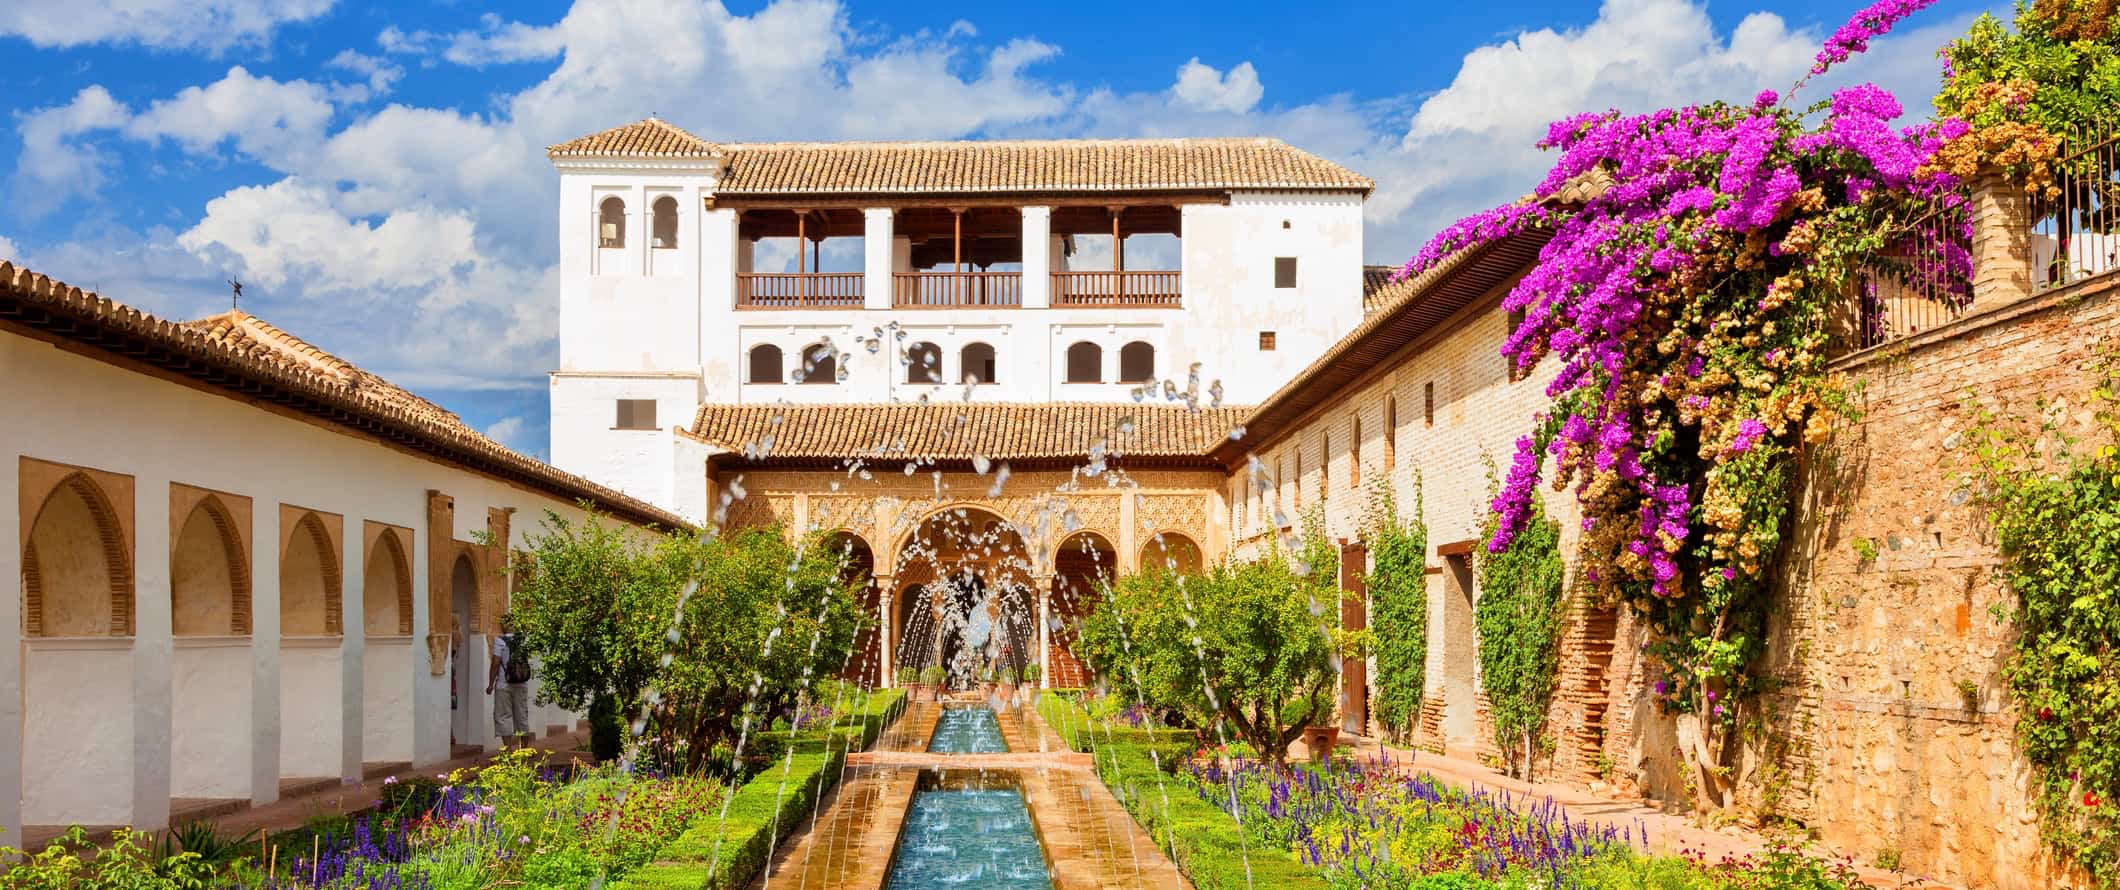 The iconic Alhambra Palace in Granada, Spain featuring a long fountain and lush greenery